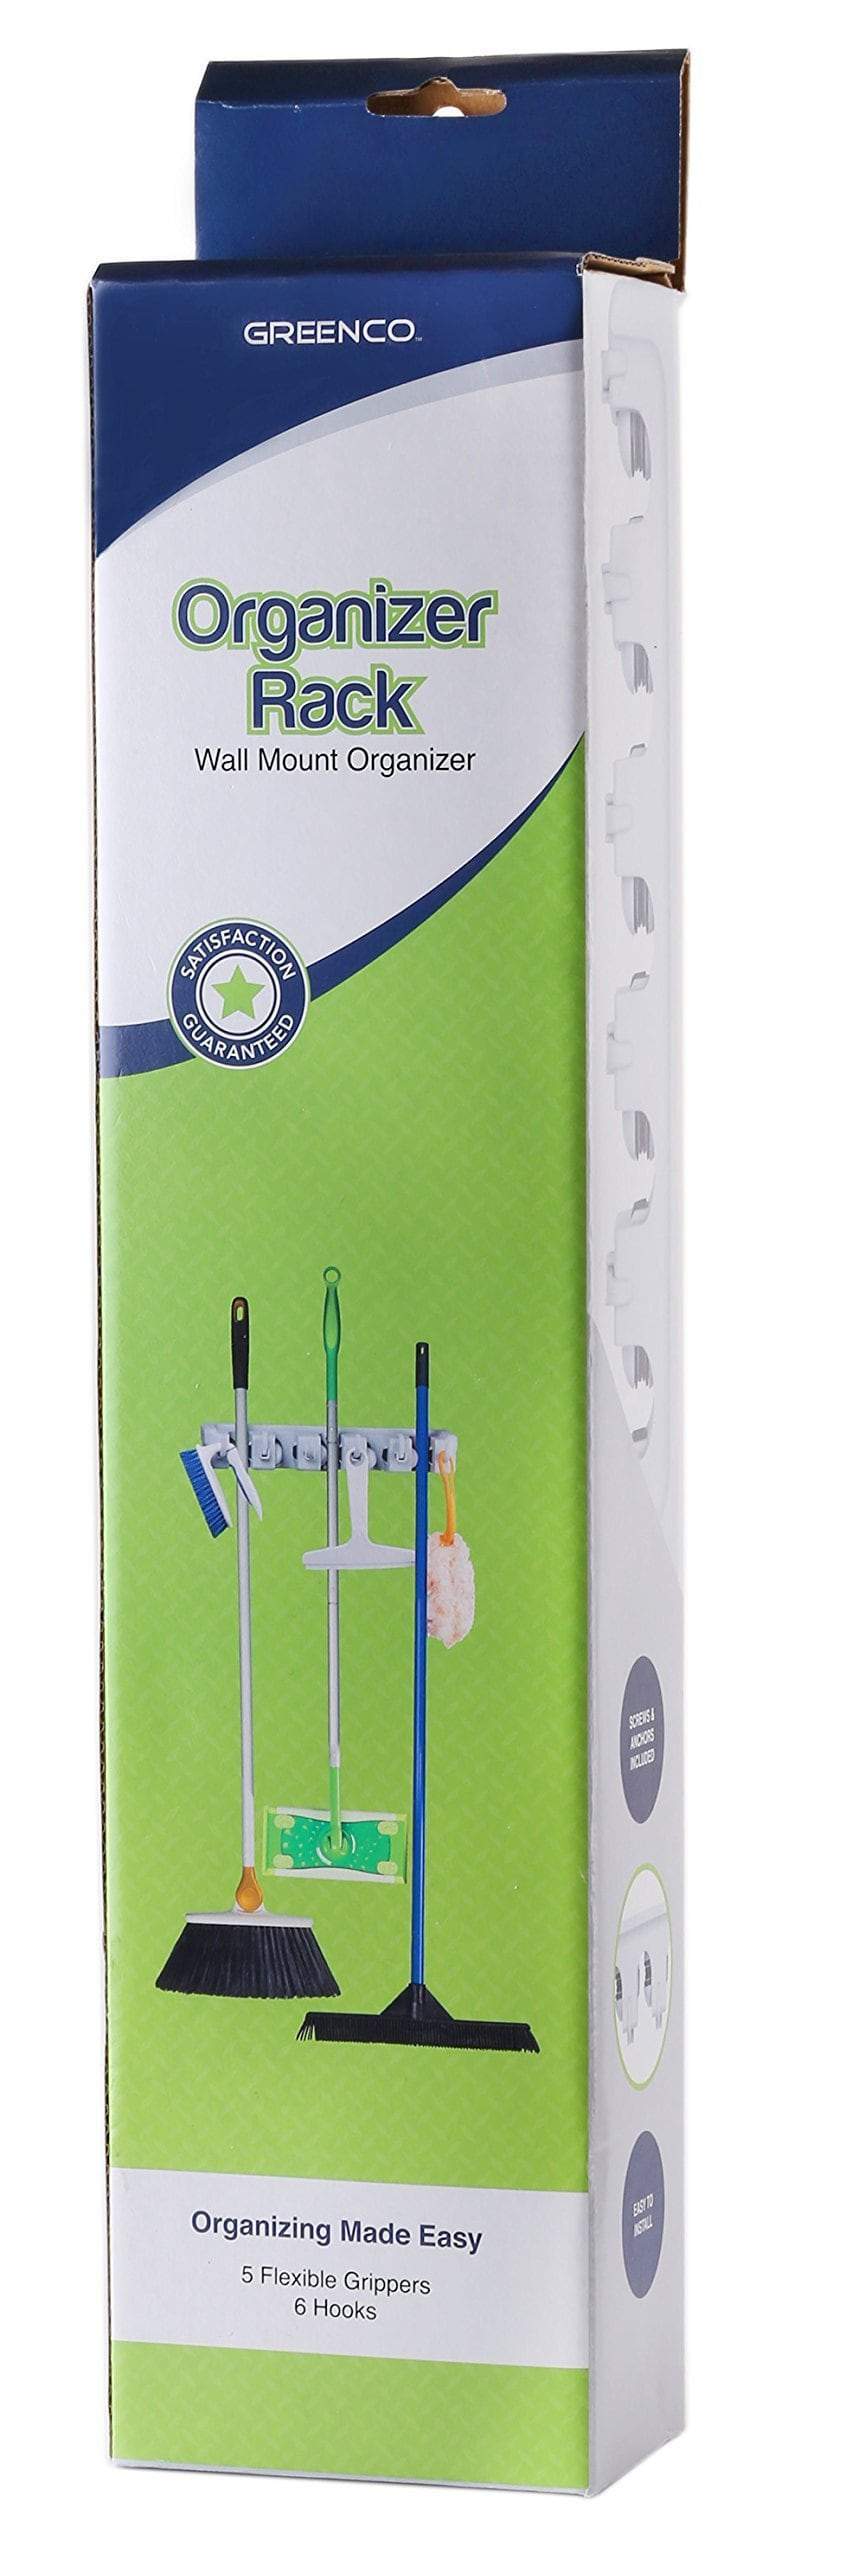 Organize with greenco mop and broom organiser wall and closet mount organizer rack holds brooms mops rakes garden equipment tools and more contains 5 non slip automatically adjustable holders and 6 hooks